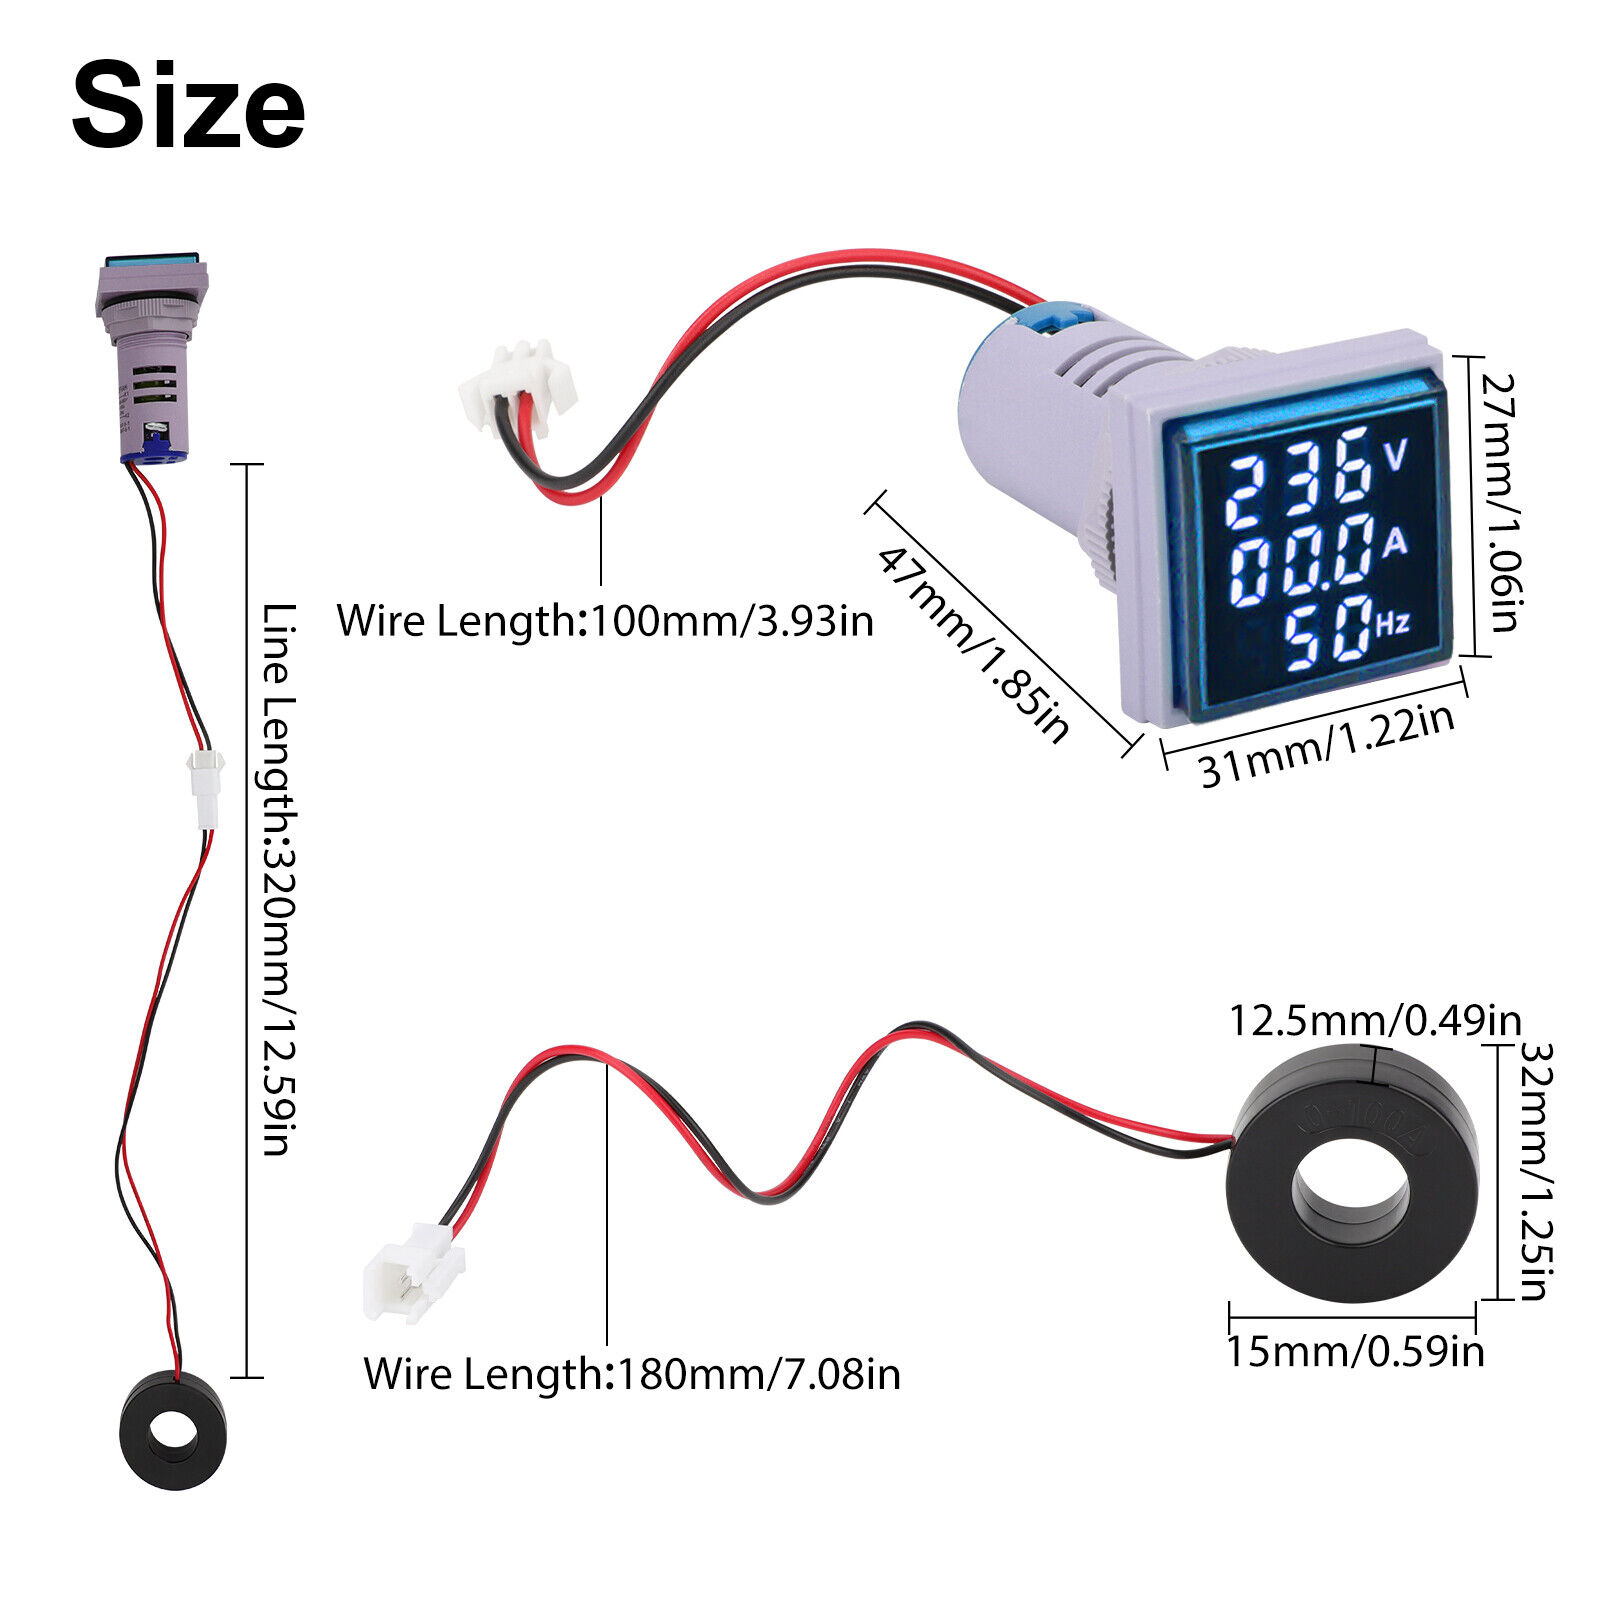 Great Choice Products 2X Ac 60-500V 0-100A 22Mm 3 In 1 Voltmeter Ammeter Led Digital Volt/Amp Meter